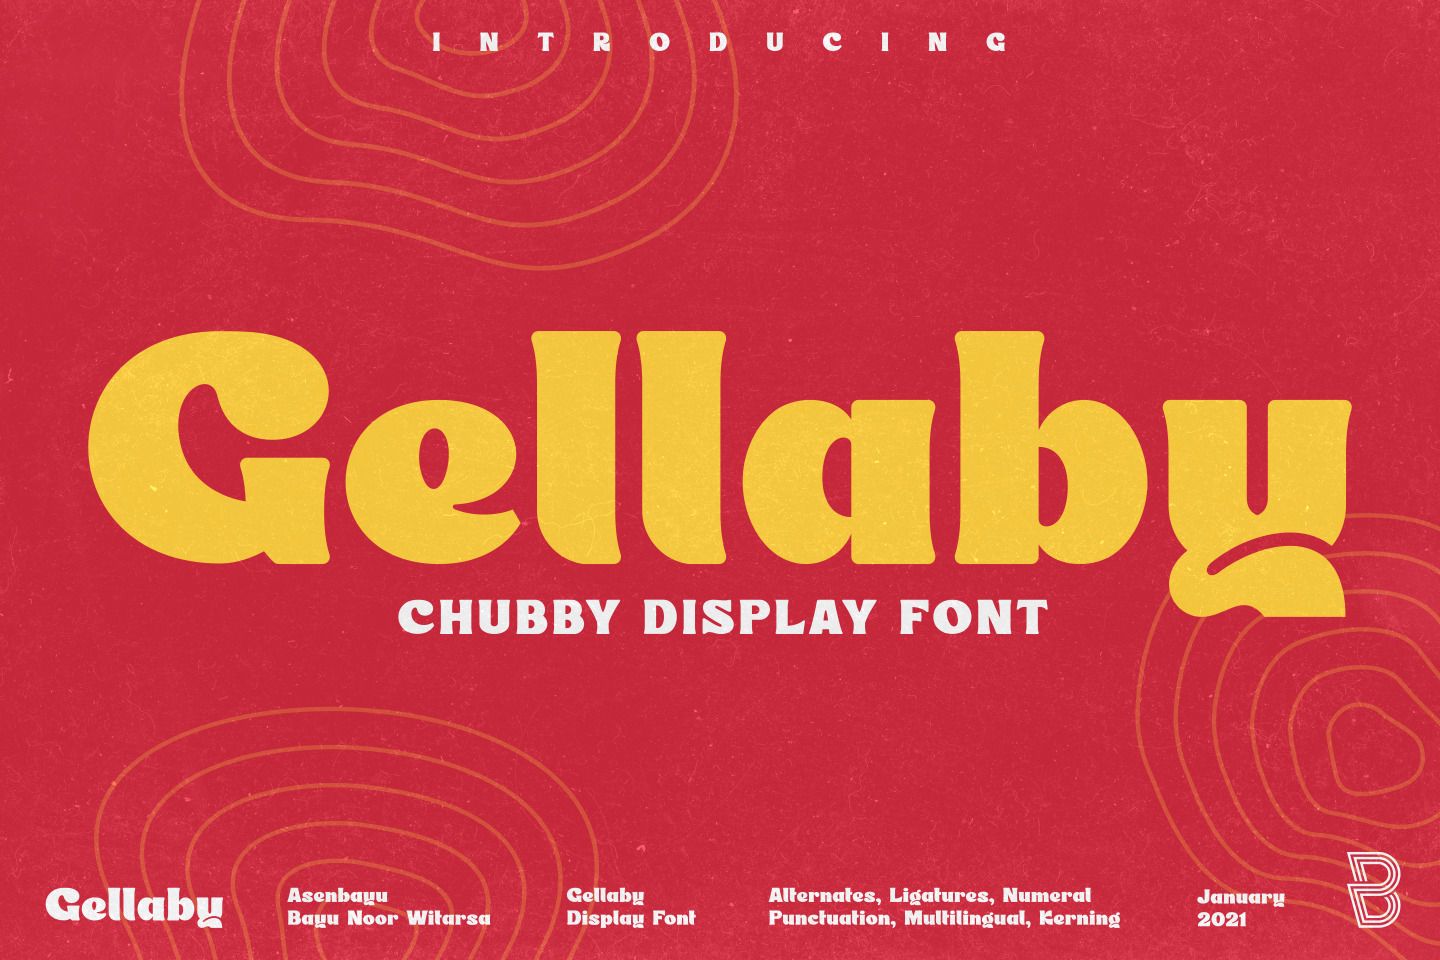 A chubby display font